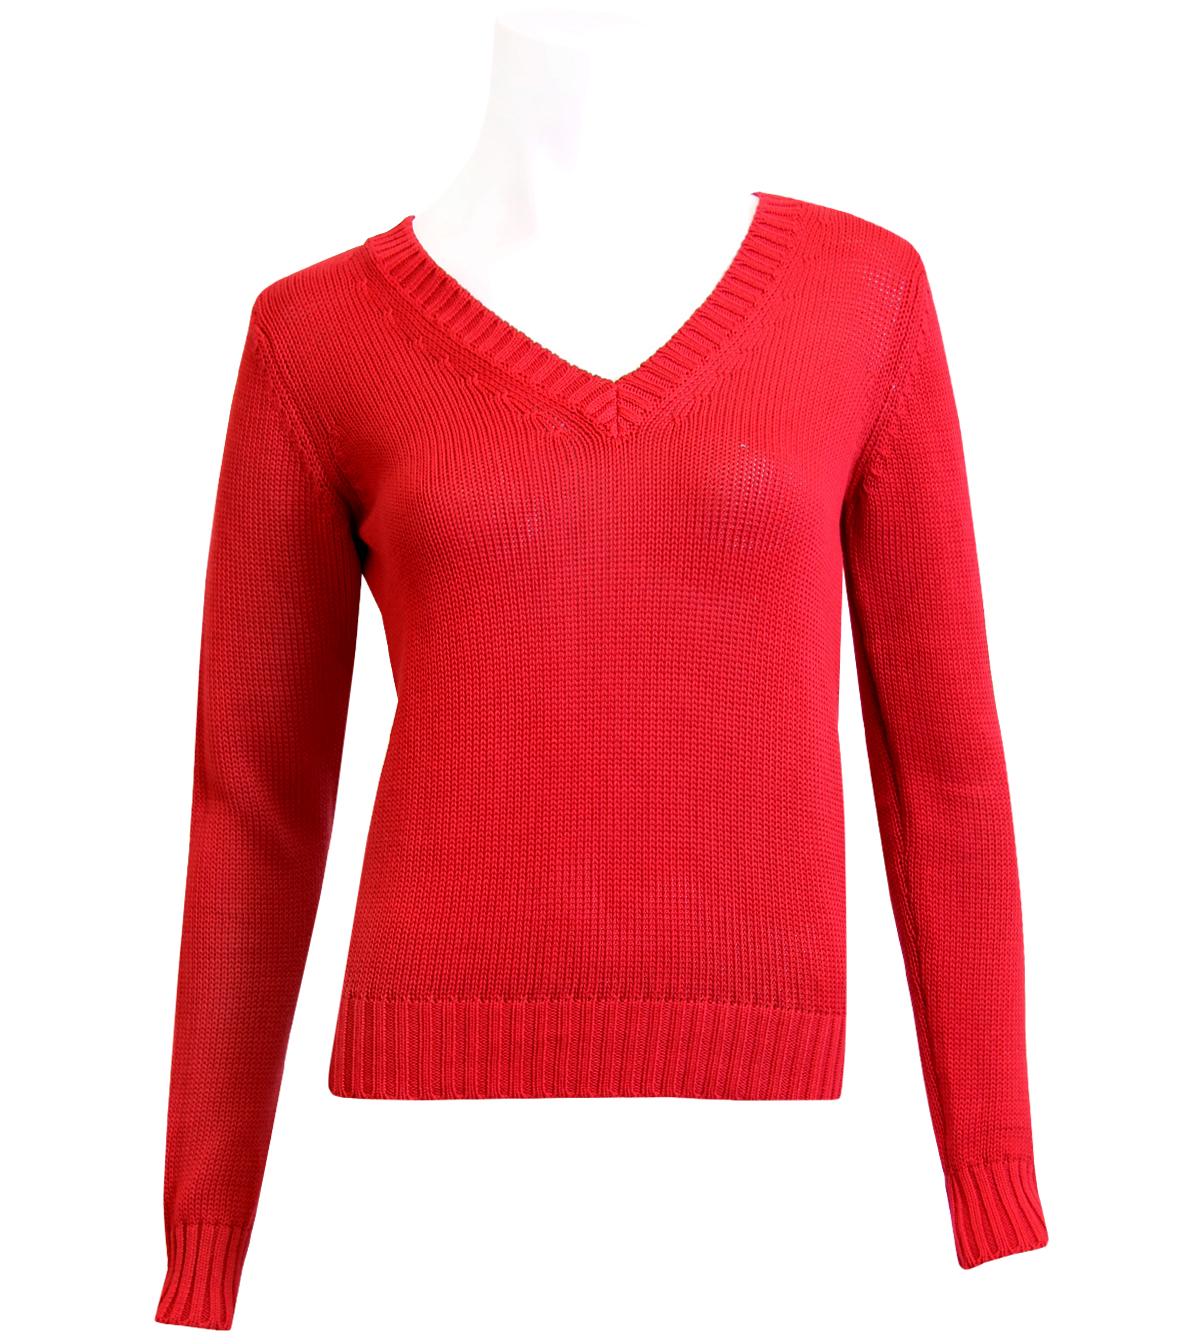 Foto Armani Jeans Red Knitted Cotton V Neck Sweatshirt